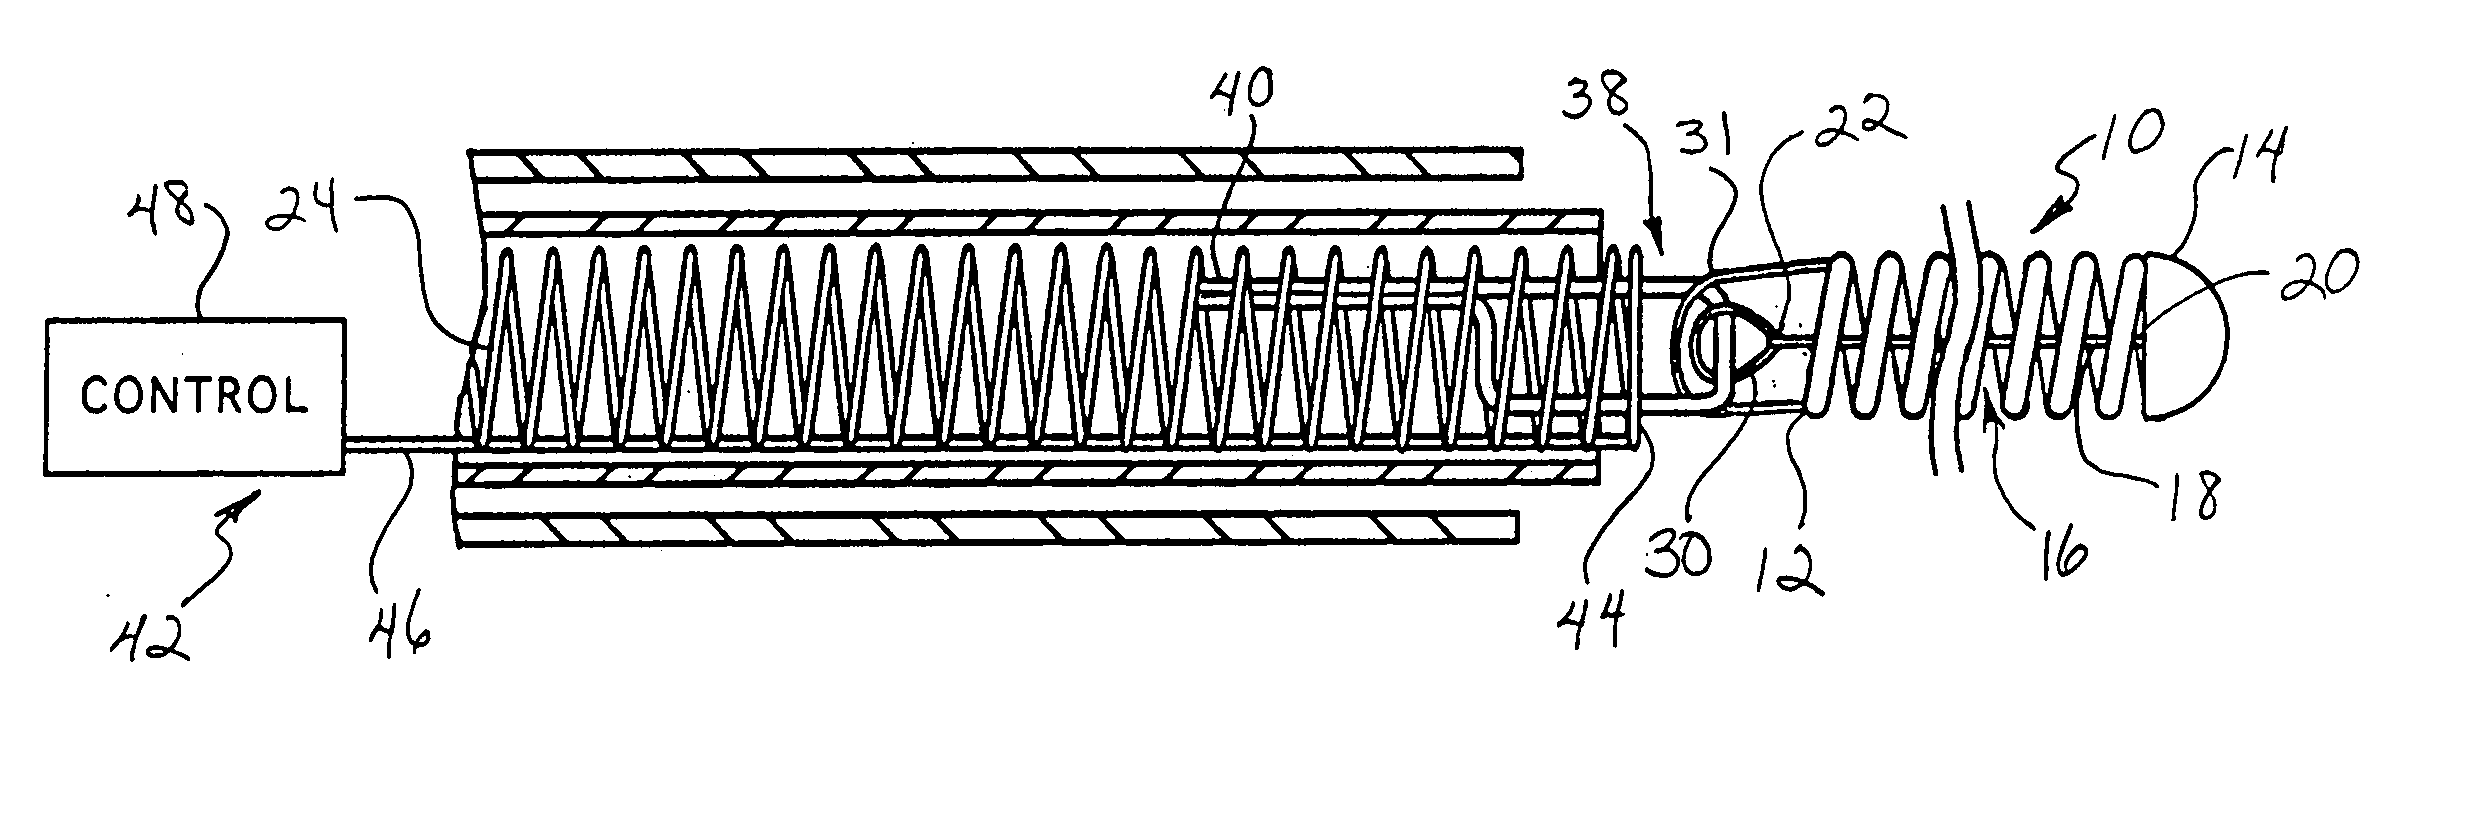 Stretch resistant therapeutic device